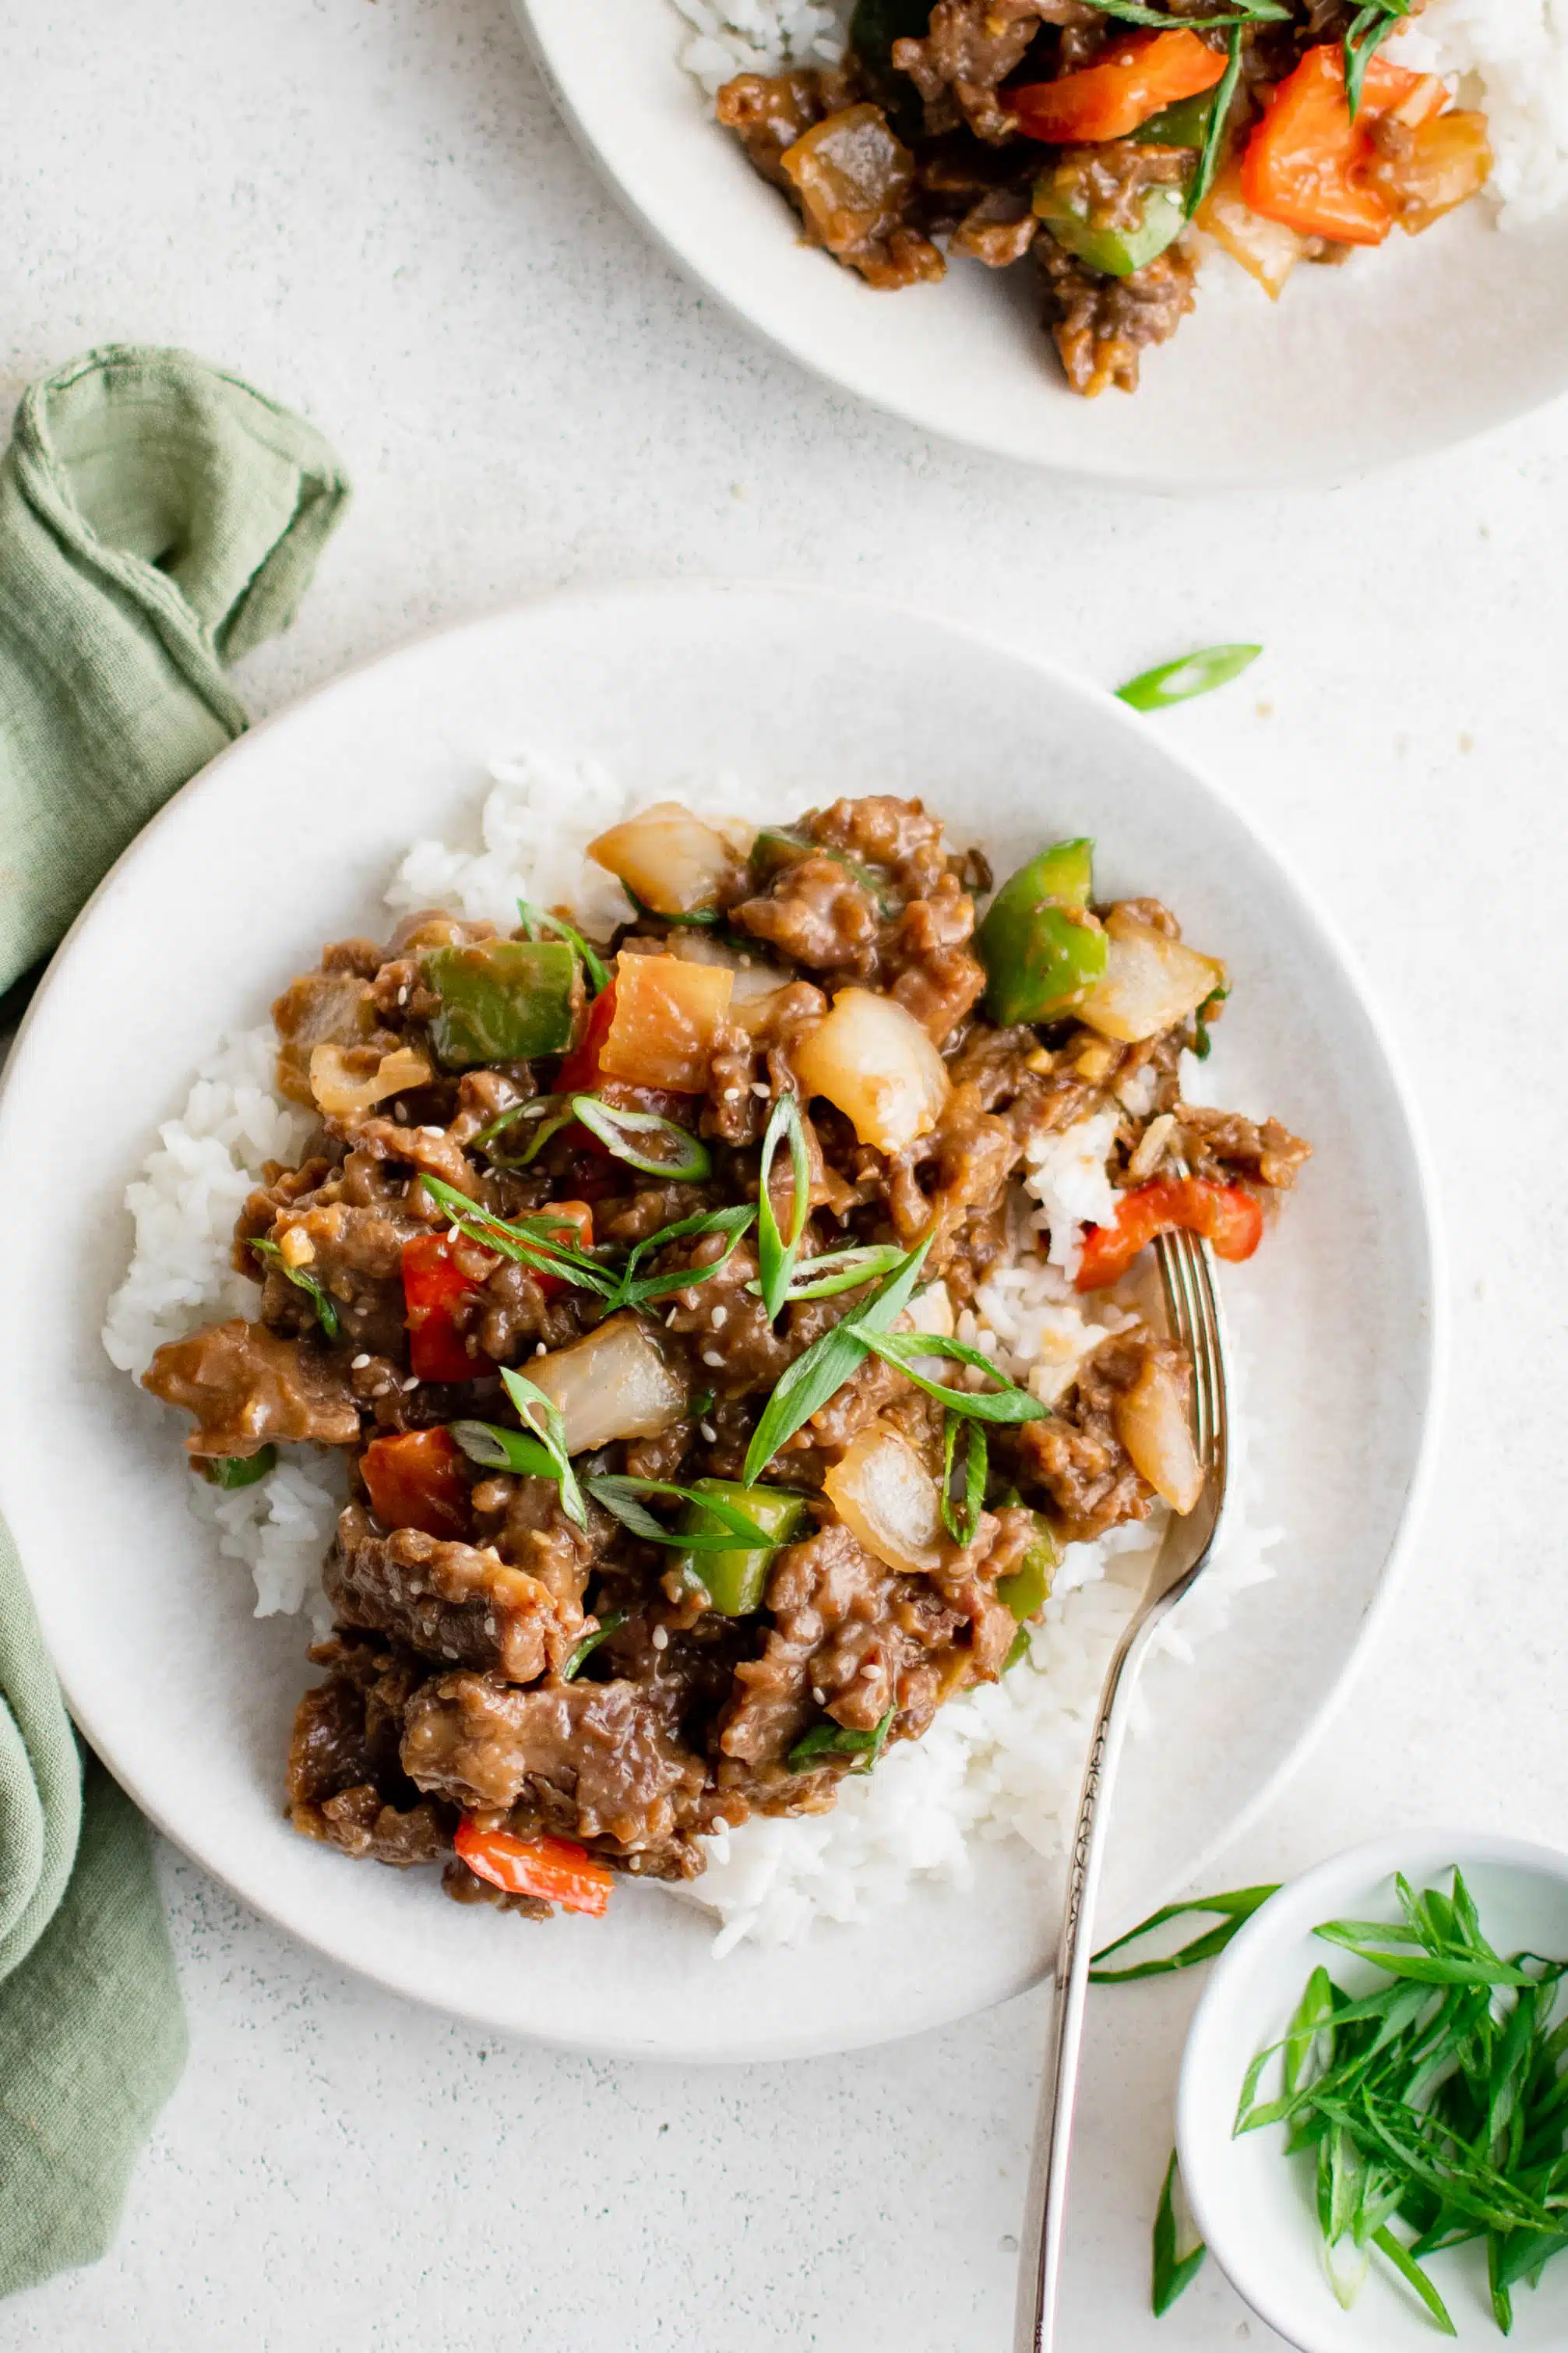 Cooked Mongolian Beef with red and green bell peppers served atop a bed of cooked white rice.